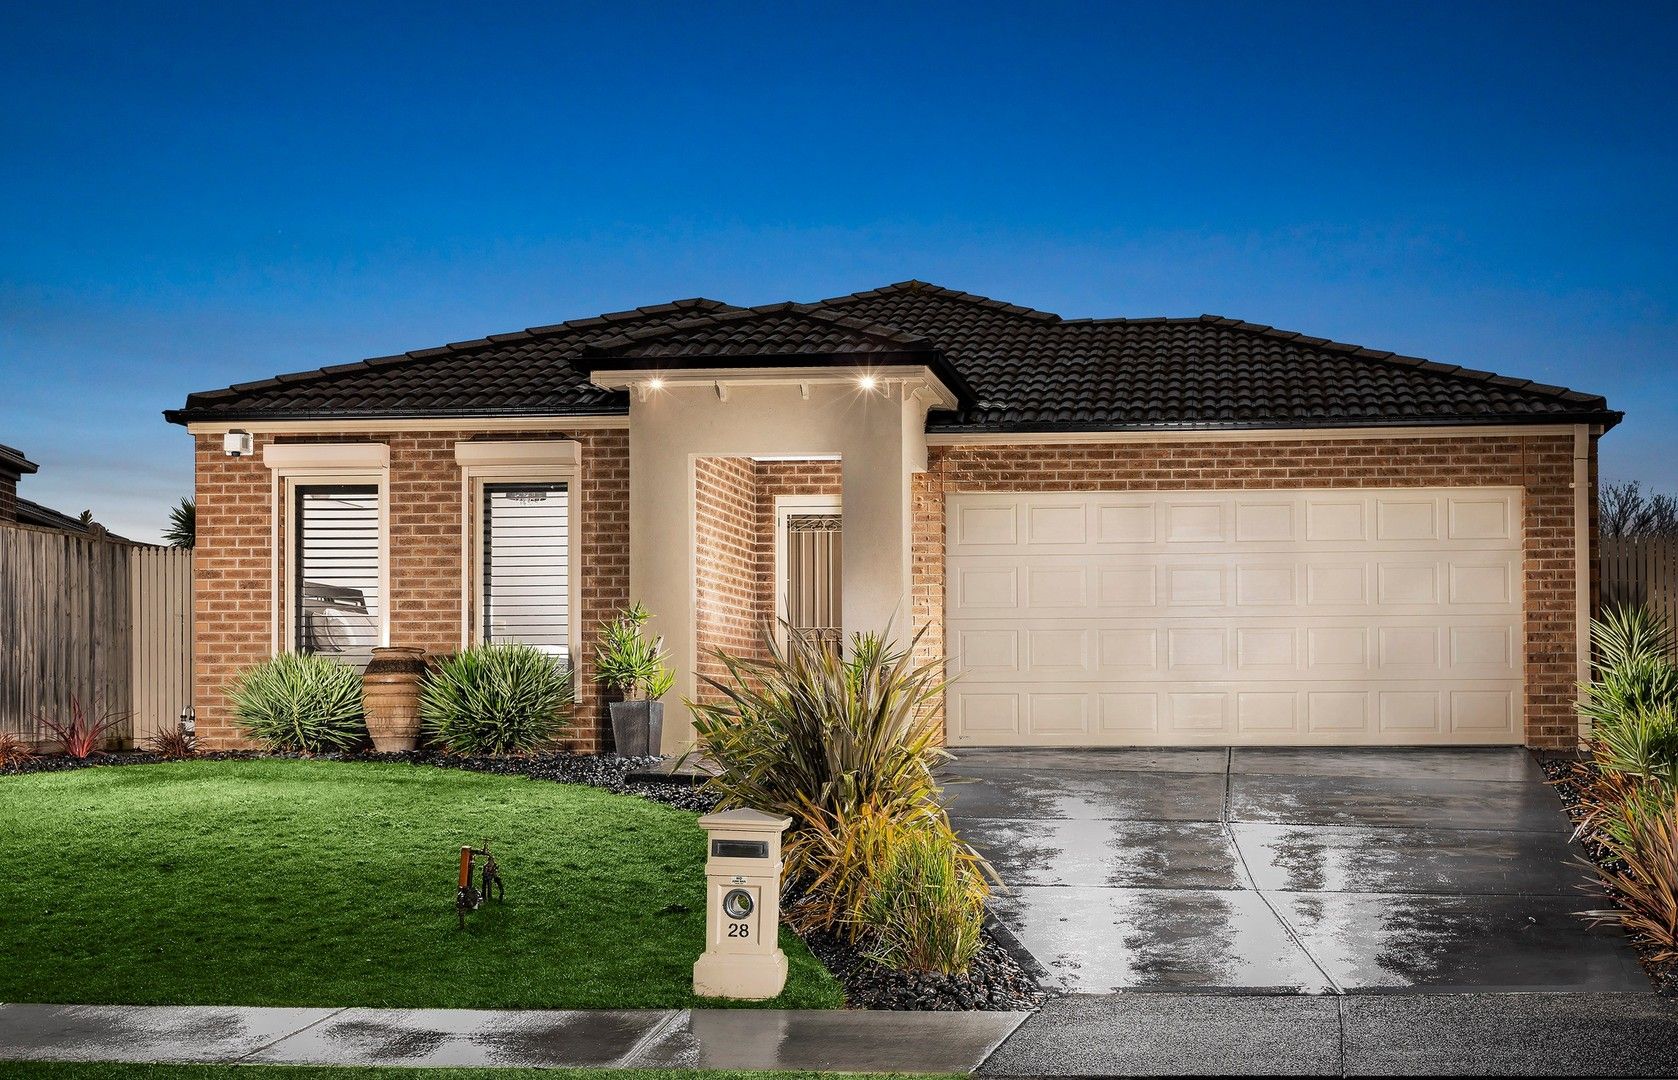 4 bedrooms House in 28 Sanctuary Crescent ROWVILLE VIC, 3178